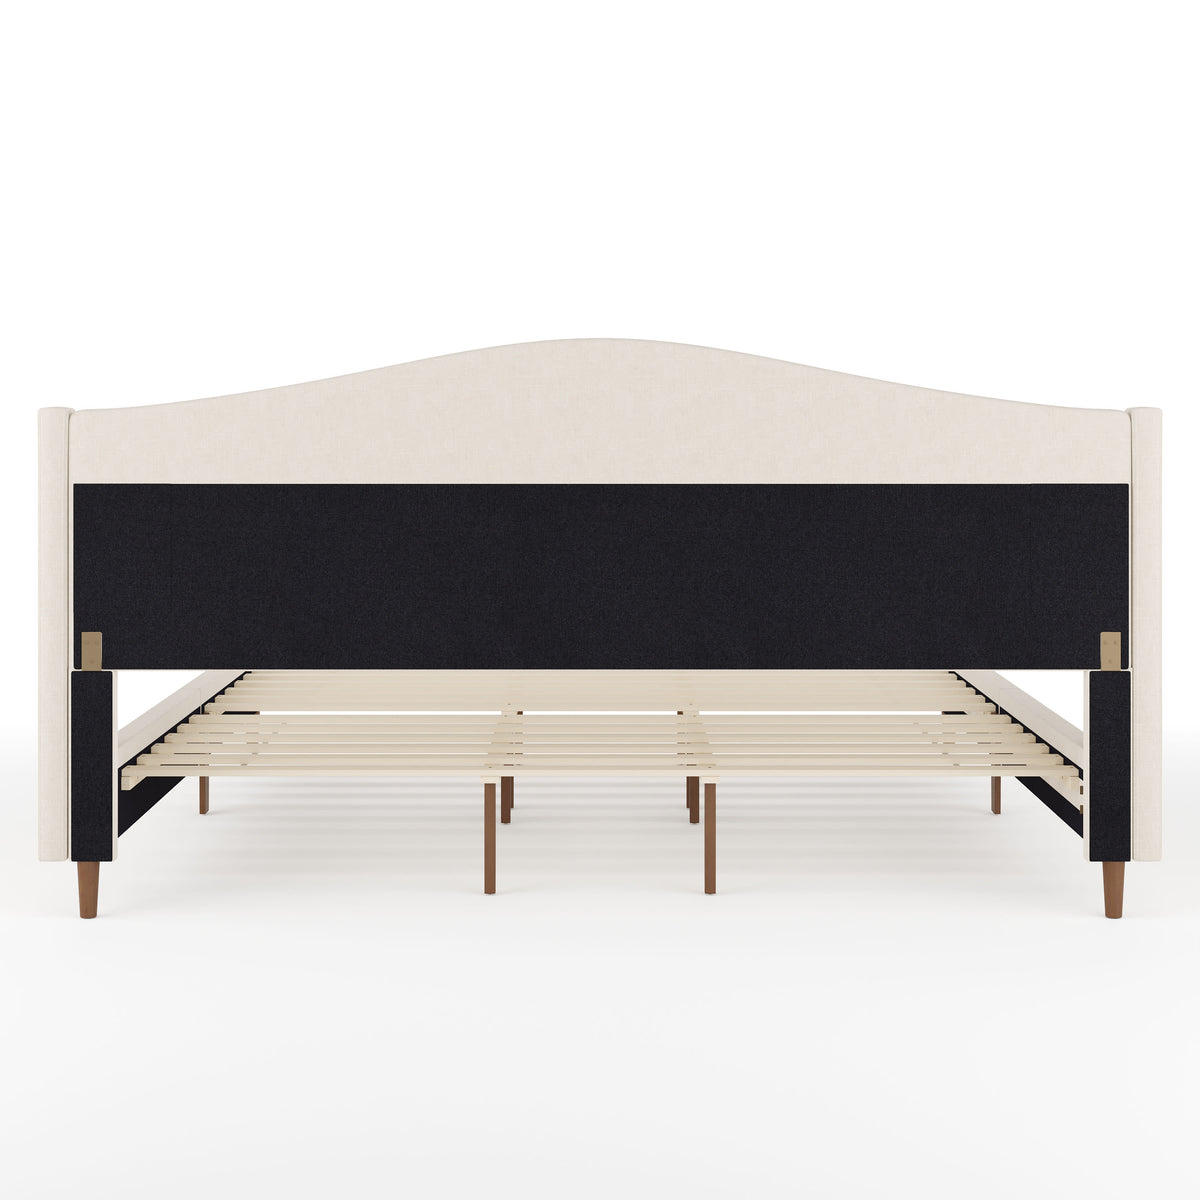 Beige Fabric/Walnut Legs,King |#| Faux Linen Upholstered King Size Platform Bed with Curved Headboard in Beige